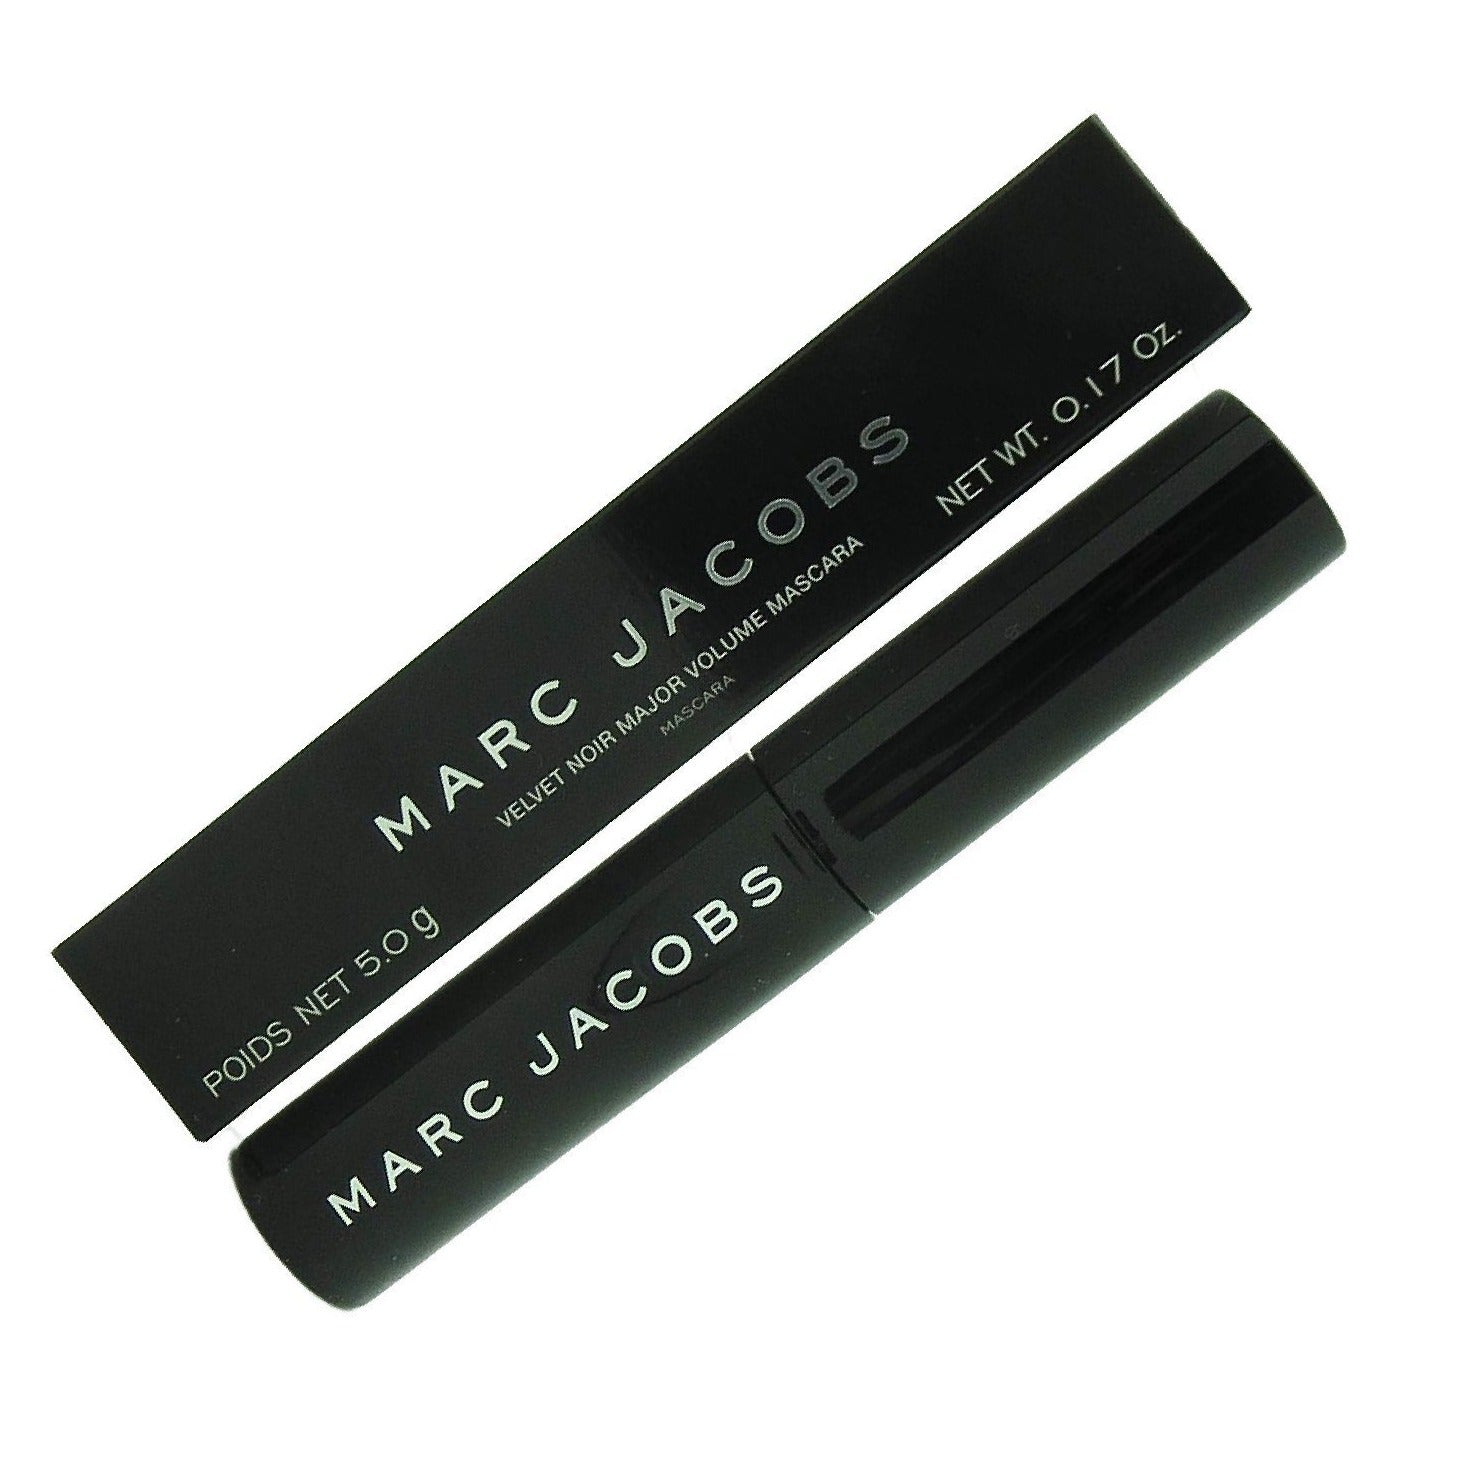 It's A smudge-proof volumizing mascara that makes lashes look thick and plush, yet never clumpy What It Does:  Adds Extreme Volume, Length & A Wipsy Dramatic Definition To Lashes, Giving Off A Super Long All Natural & Sexy Lash Appearance